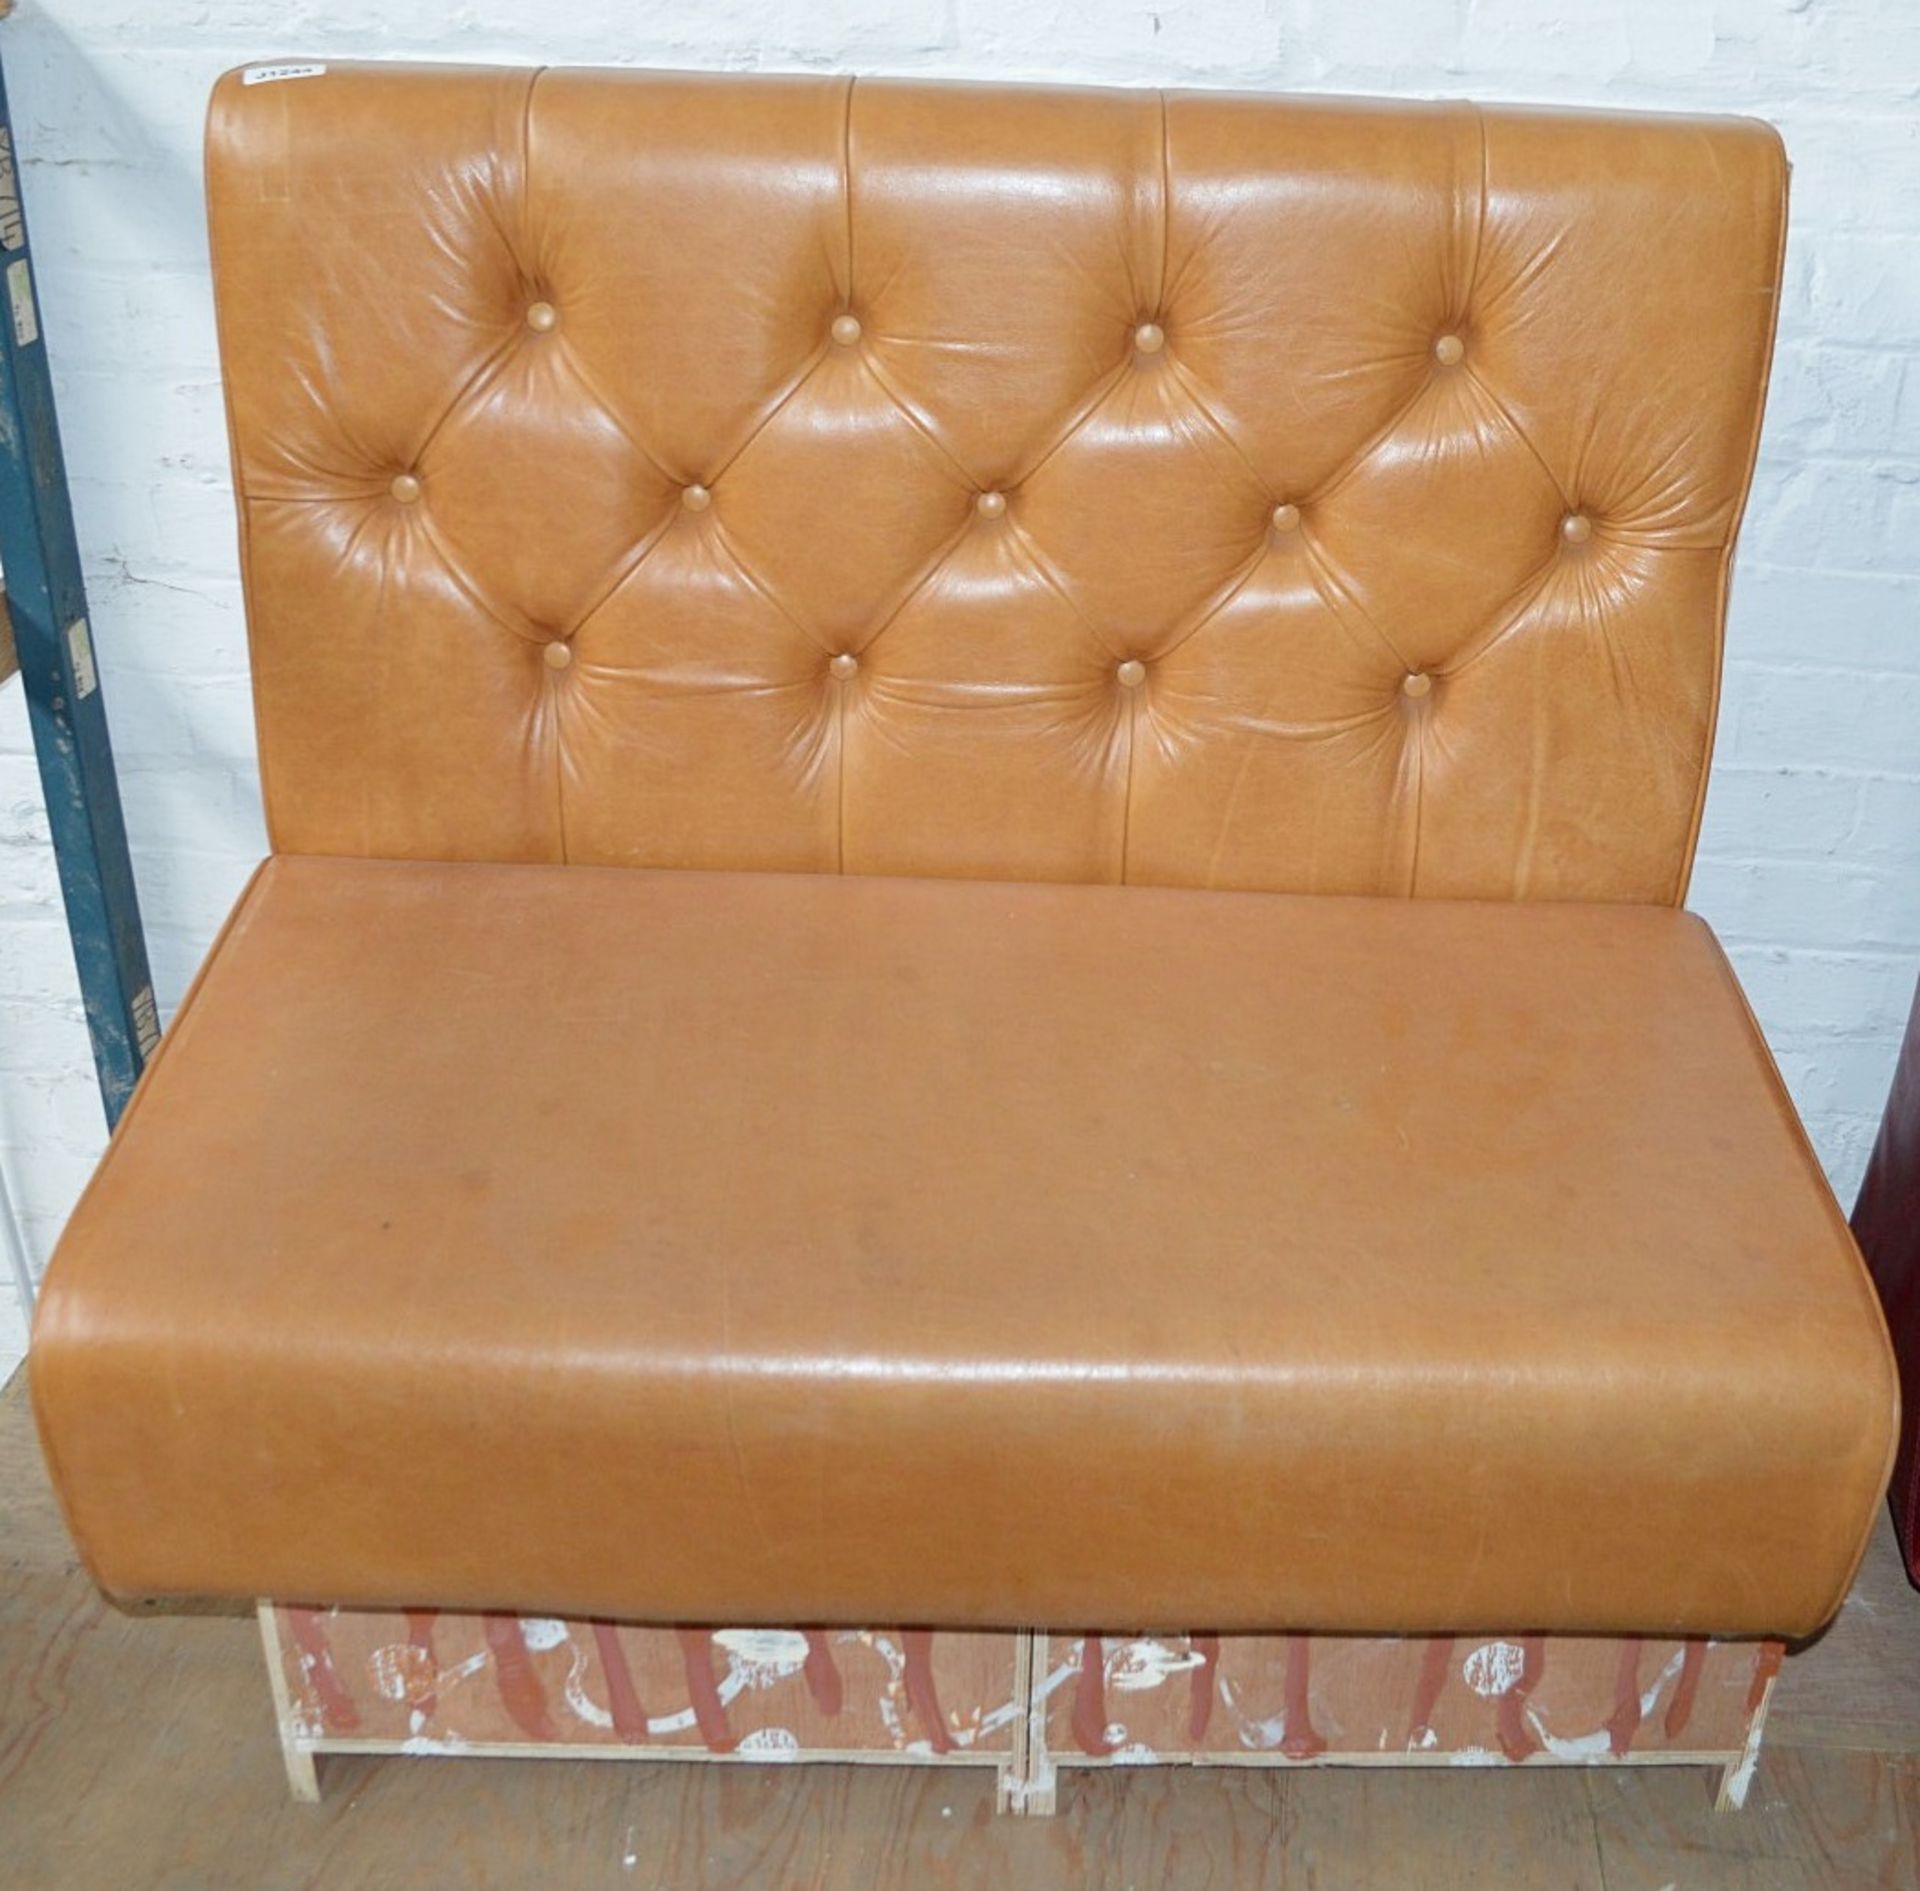 1 x Contemporary Seating Booth Section Upholstered In A Tan Coloured Leather - Image 2 of 9